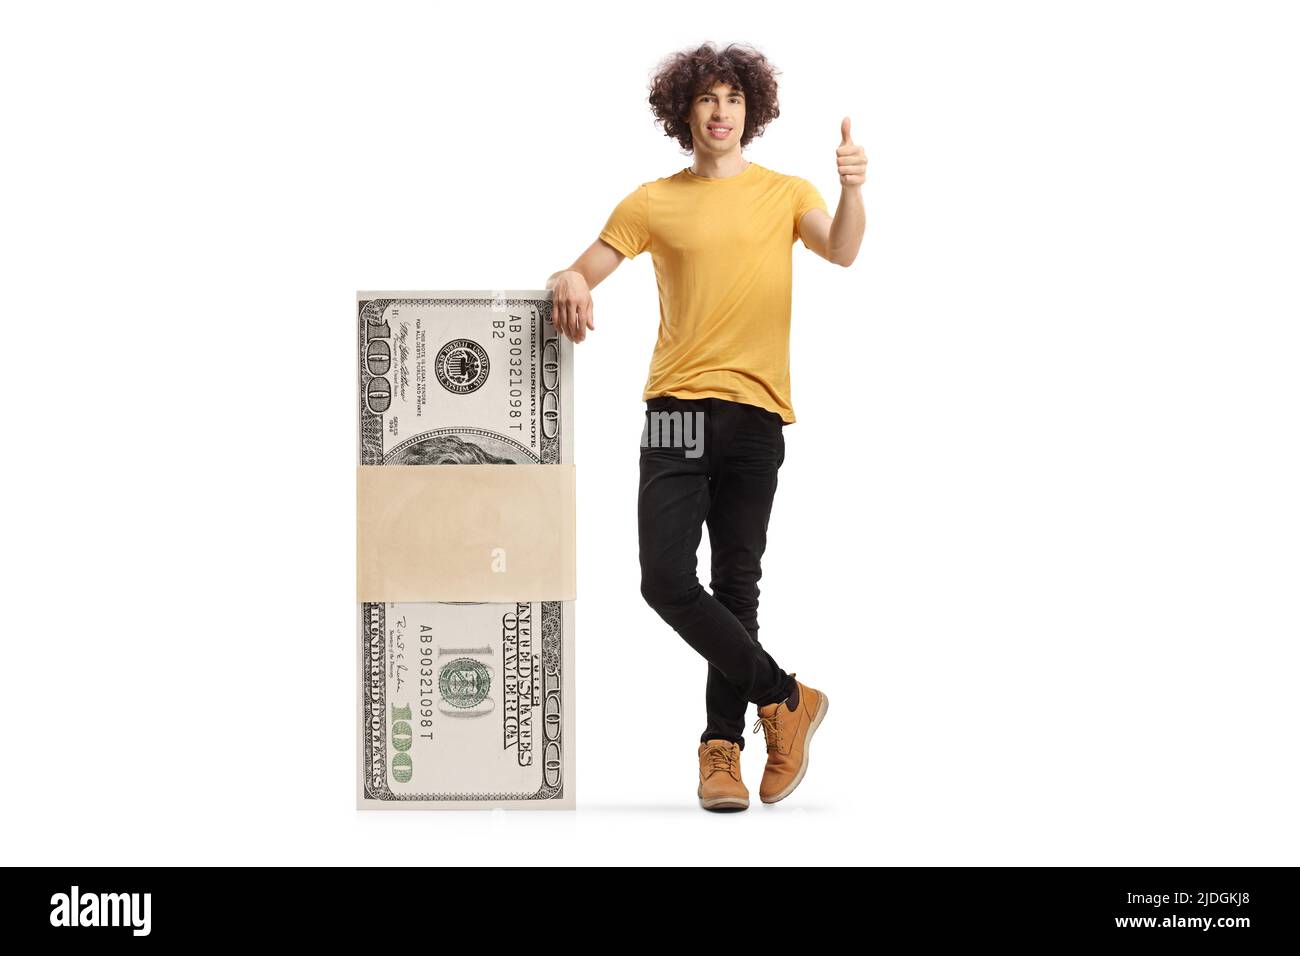 Young man leaning on a stack of money and showing thumbs up isolated on white background Stock Photo